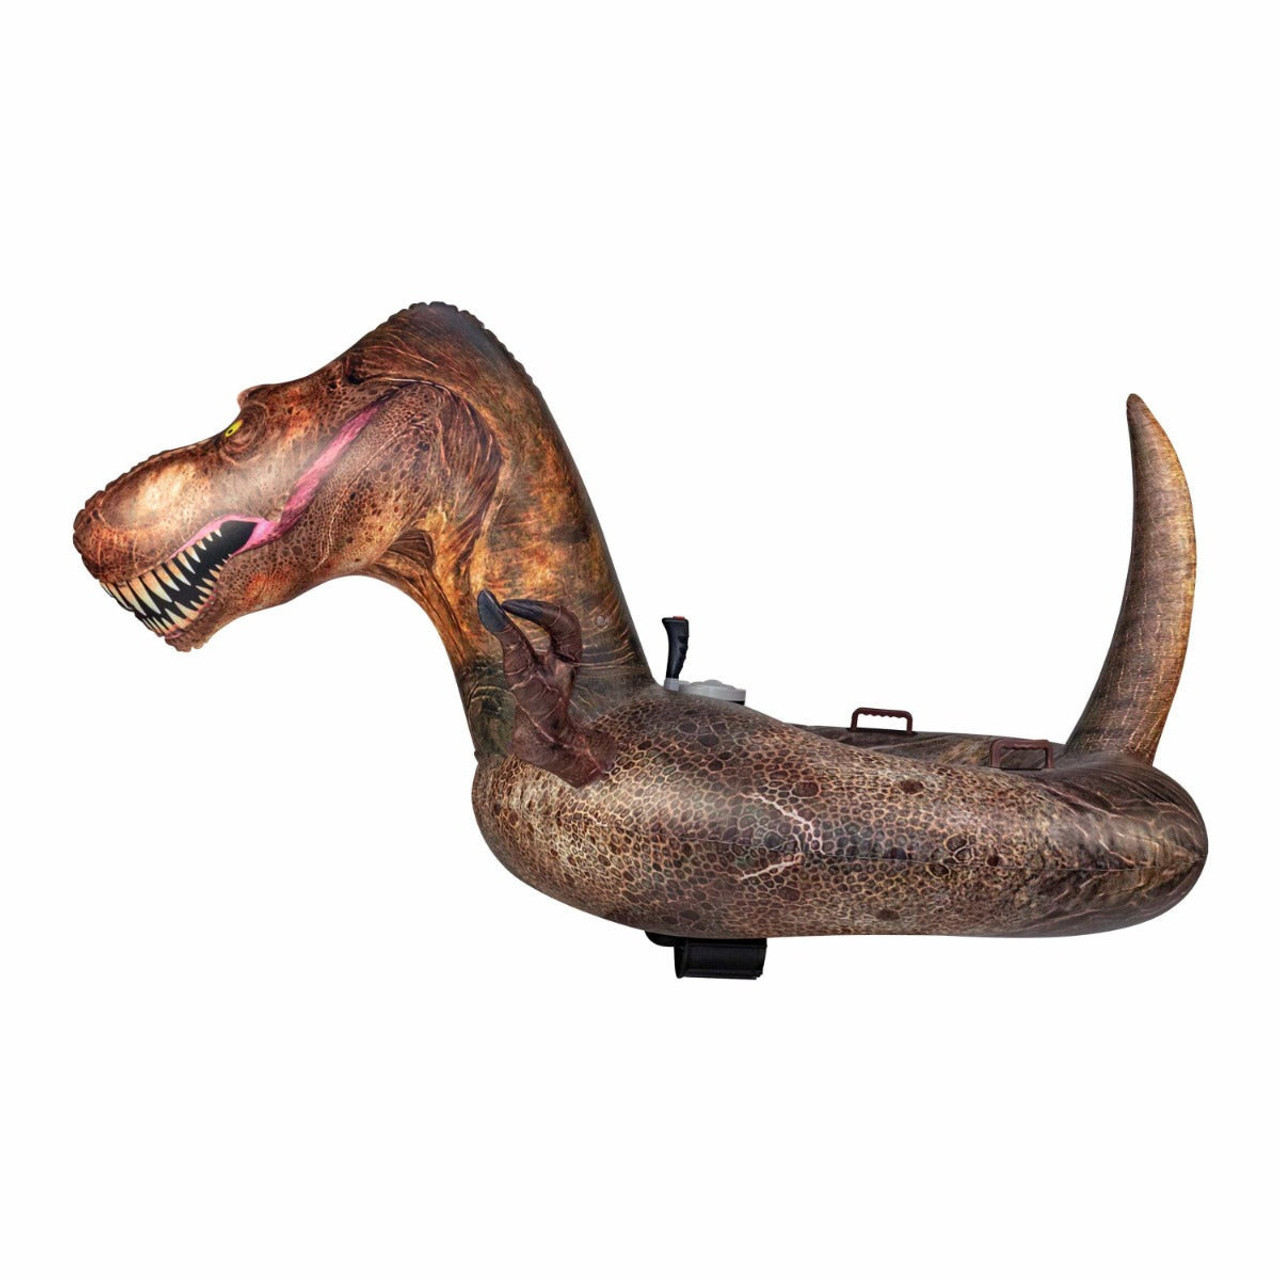 PoolCandy Tube Runner Motorized T-Rex Pool Float - Special Edition